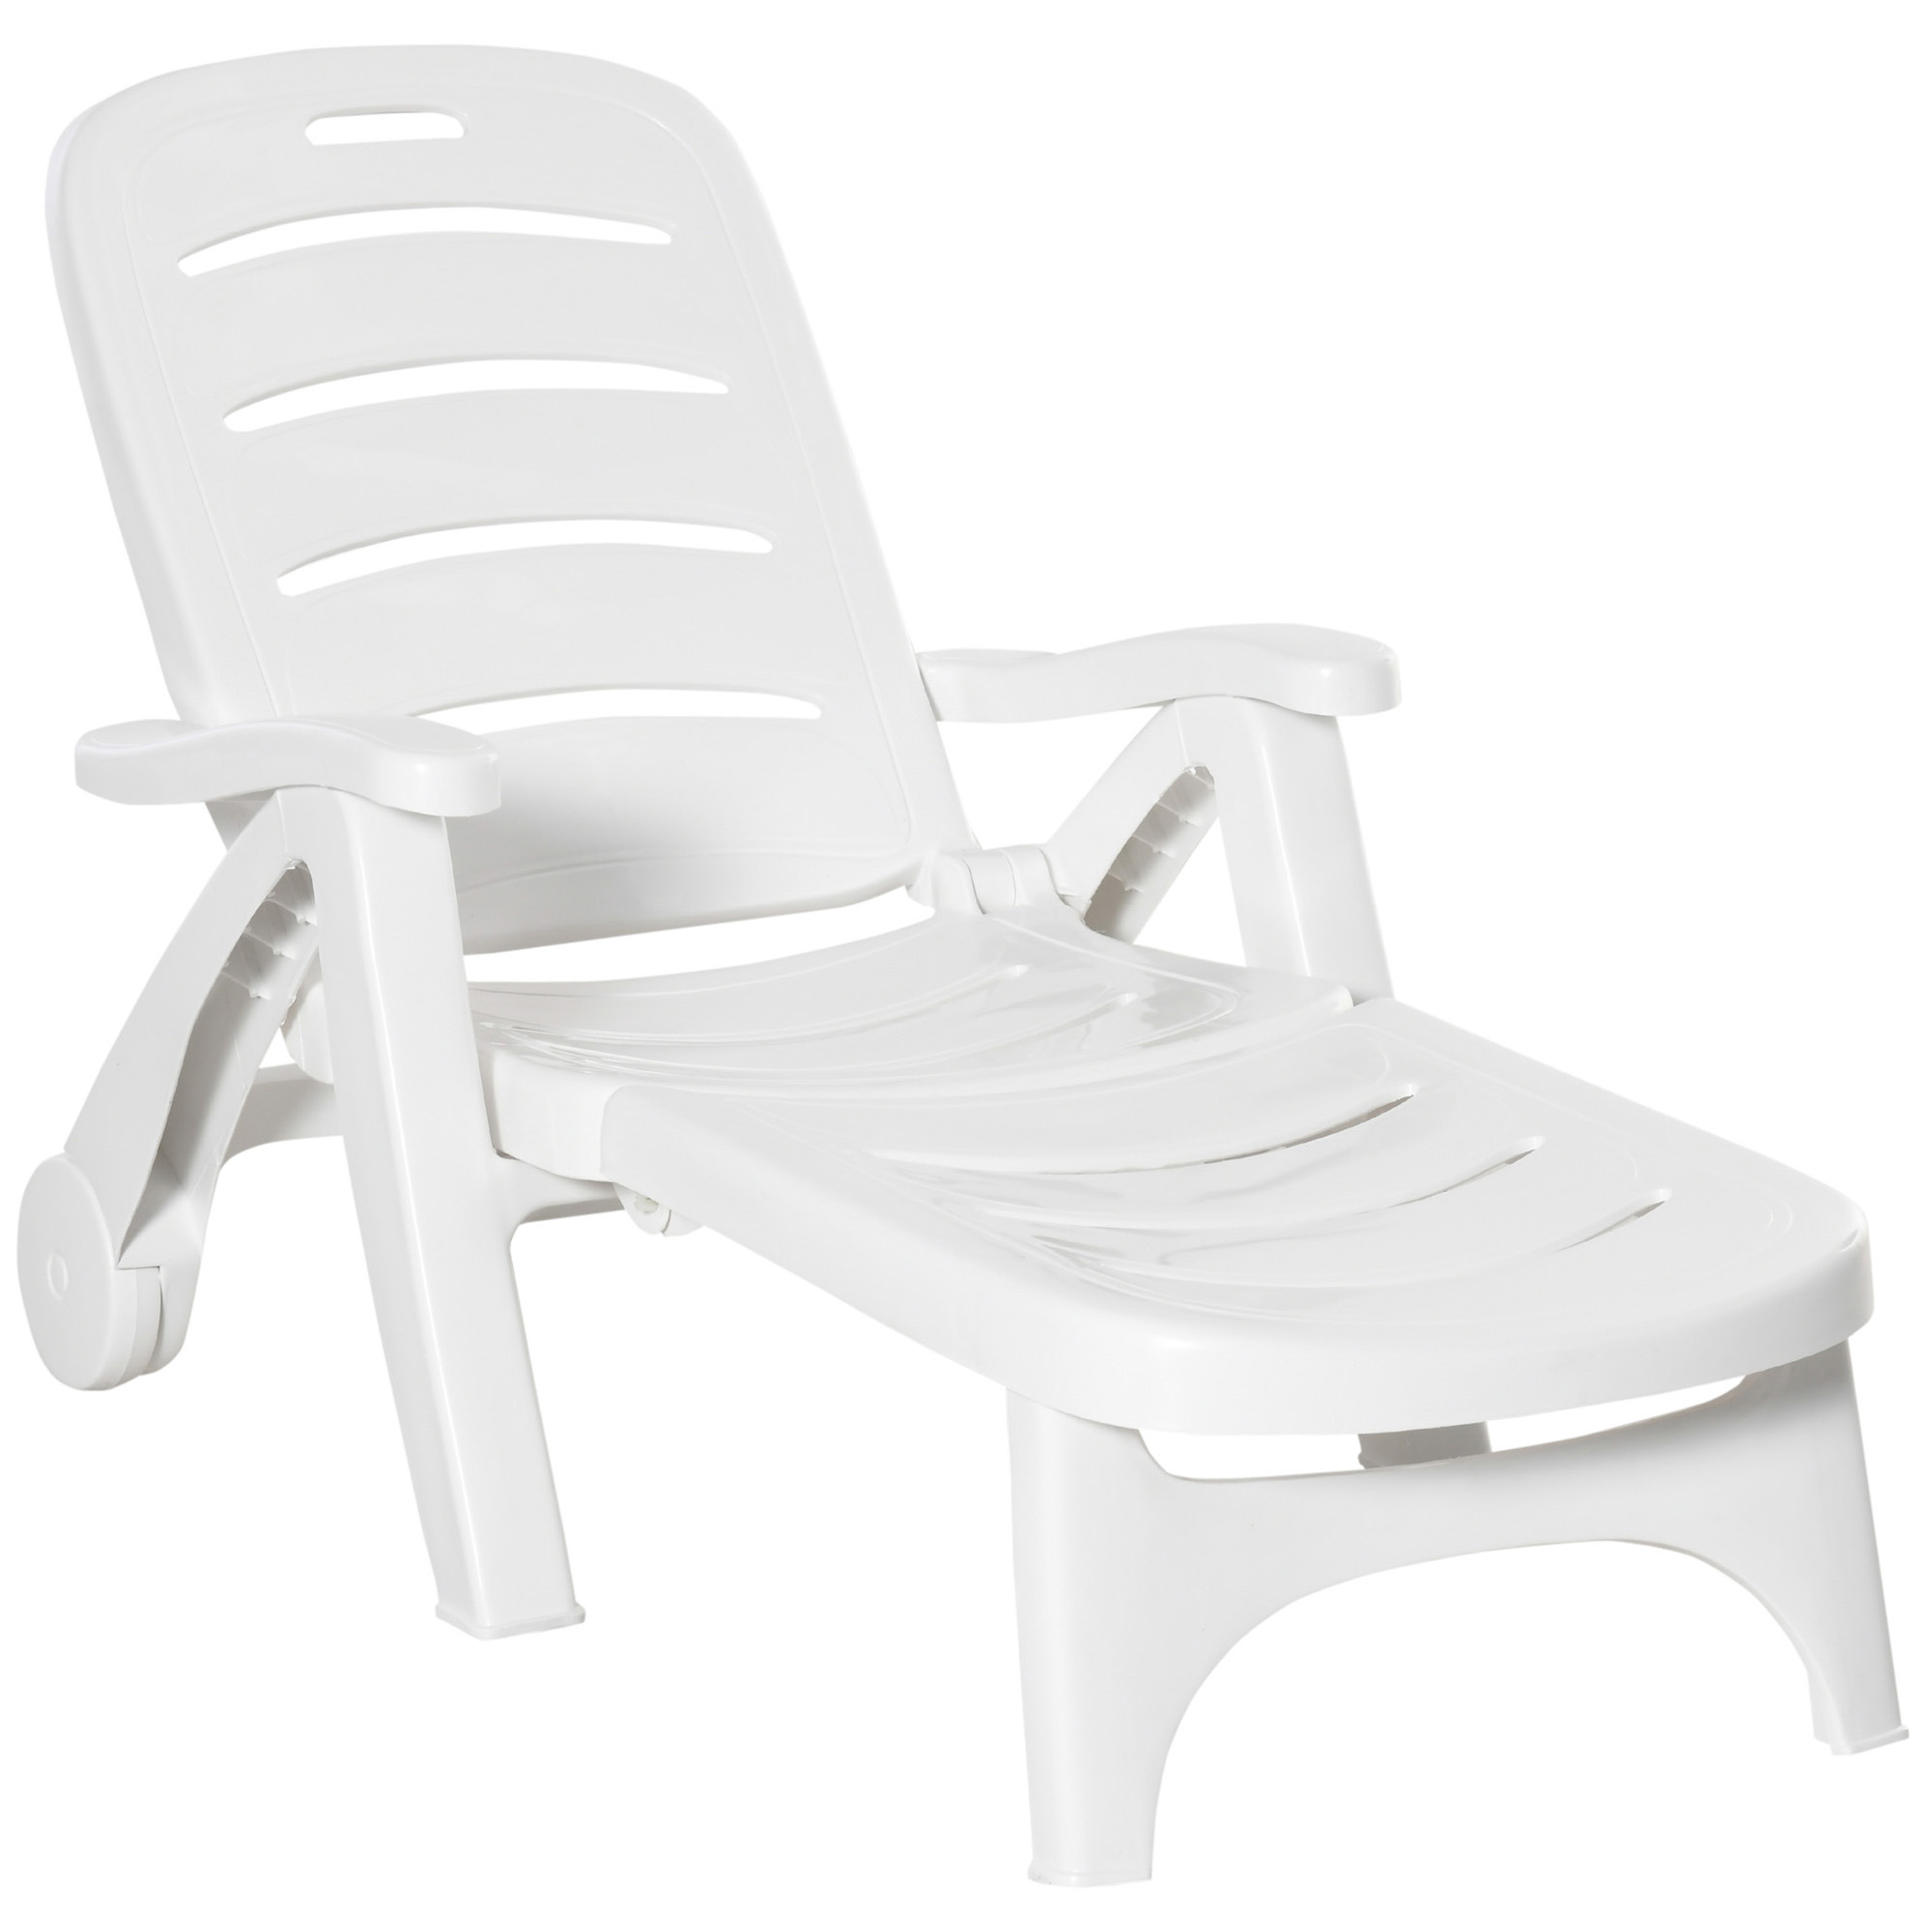 Outsunny Outdoor Folding Chaise Lounge Chair on Wheels, Patio Sun Lounger Recliner & 5-Position Backrest for Garden, Beach, Pool, White - image 1 of 9